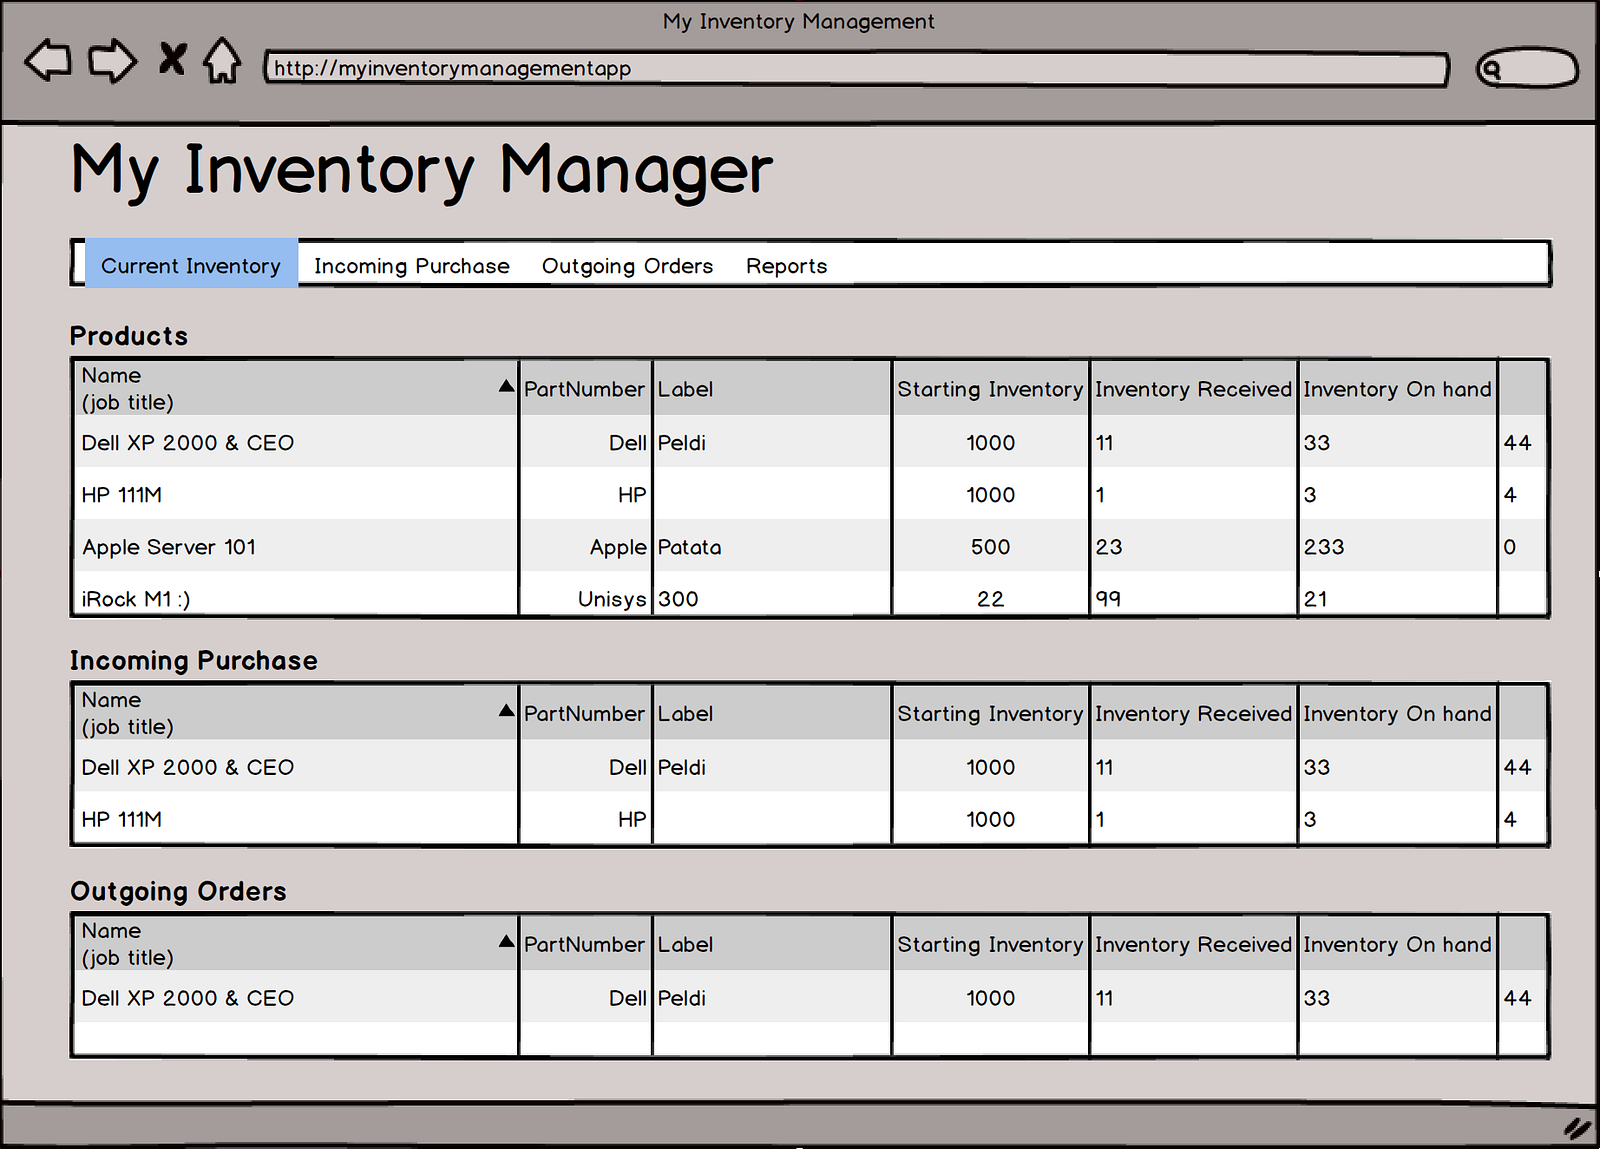 How to Make an Awesome Inventory Management Application in 